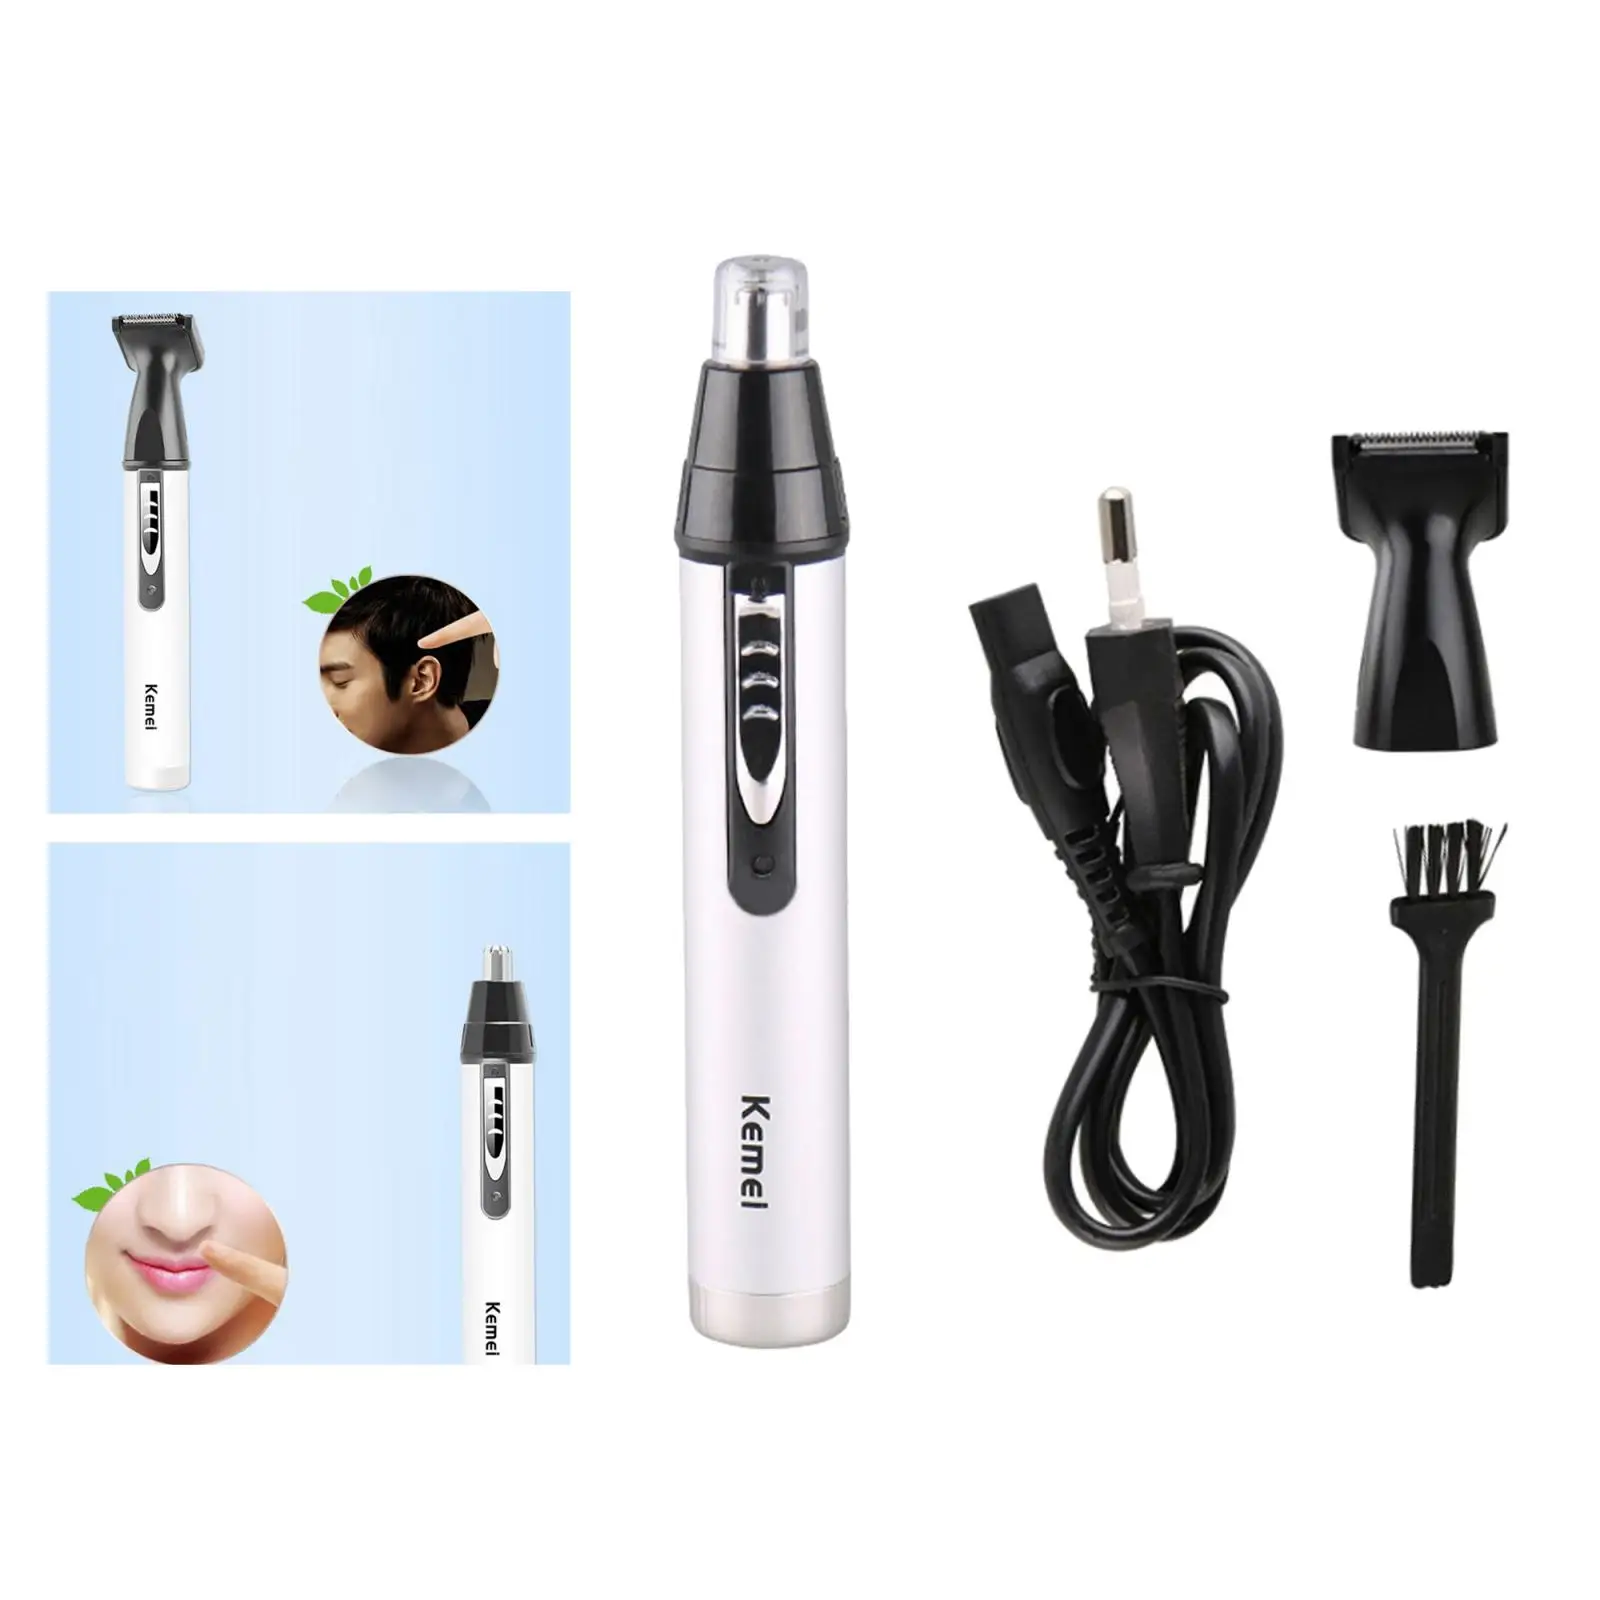 Nose And Ear Hair Trimmer, Painless Electric Nose Hair Removal for Men And